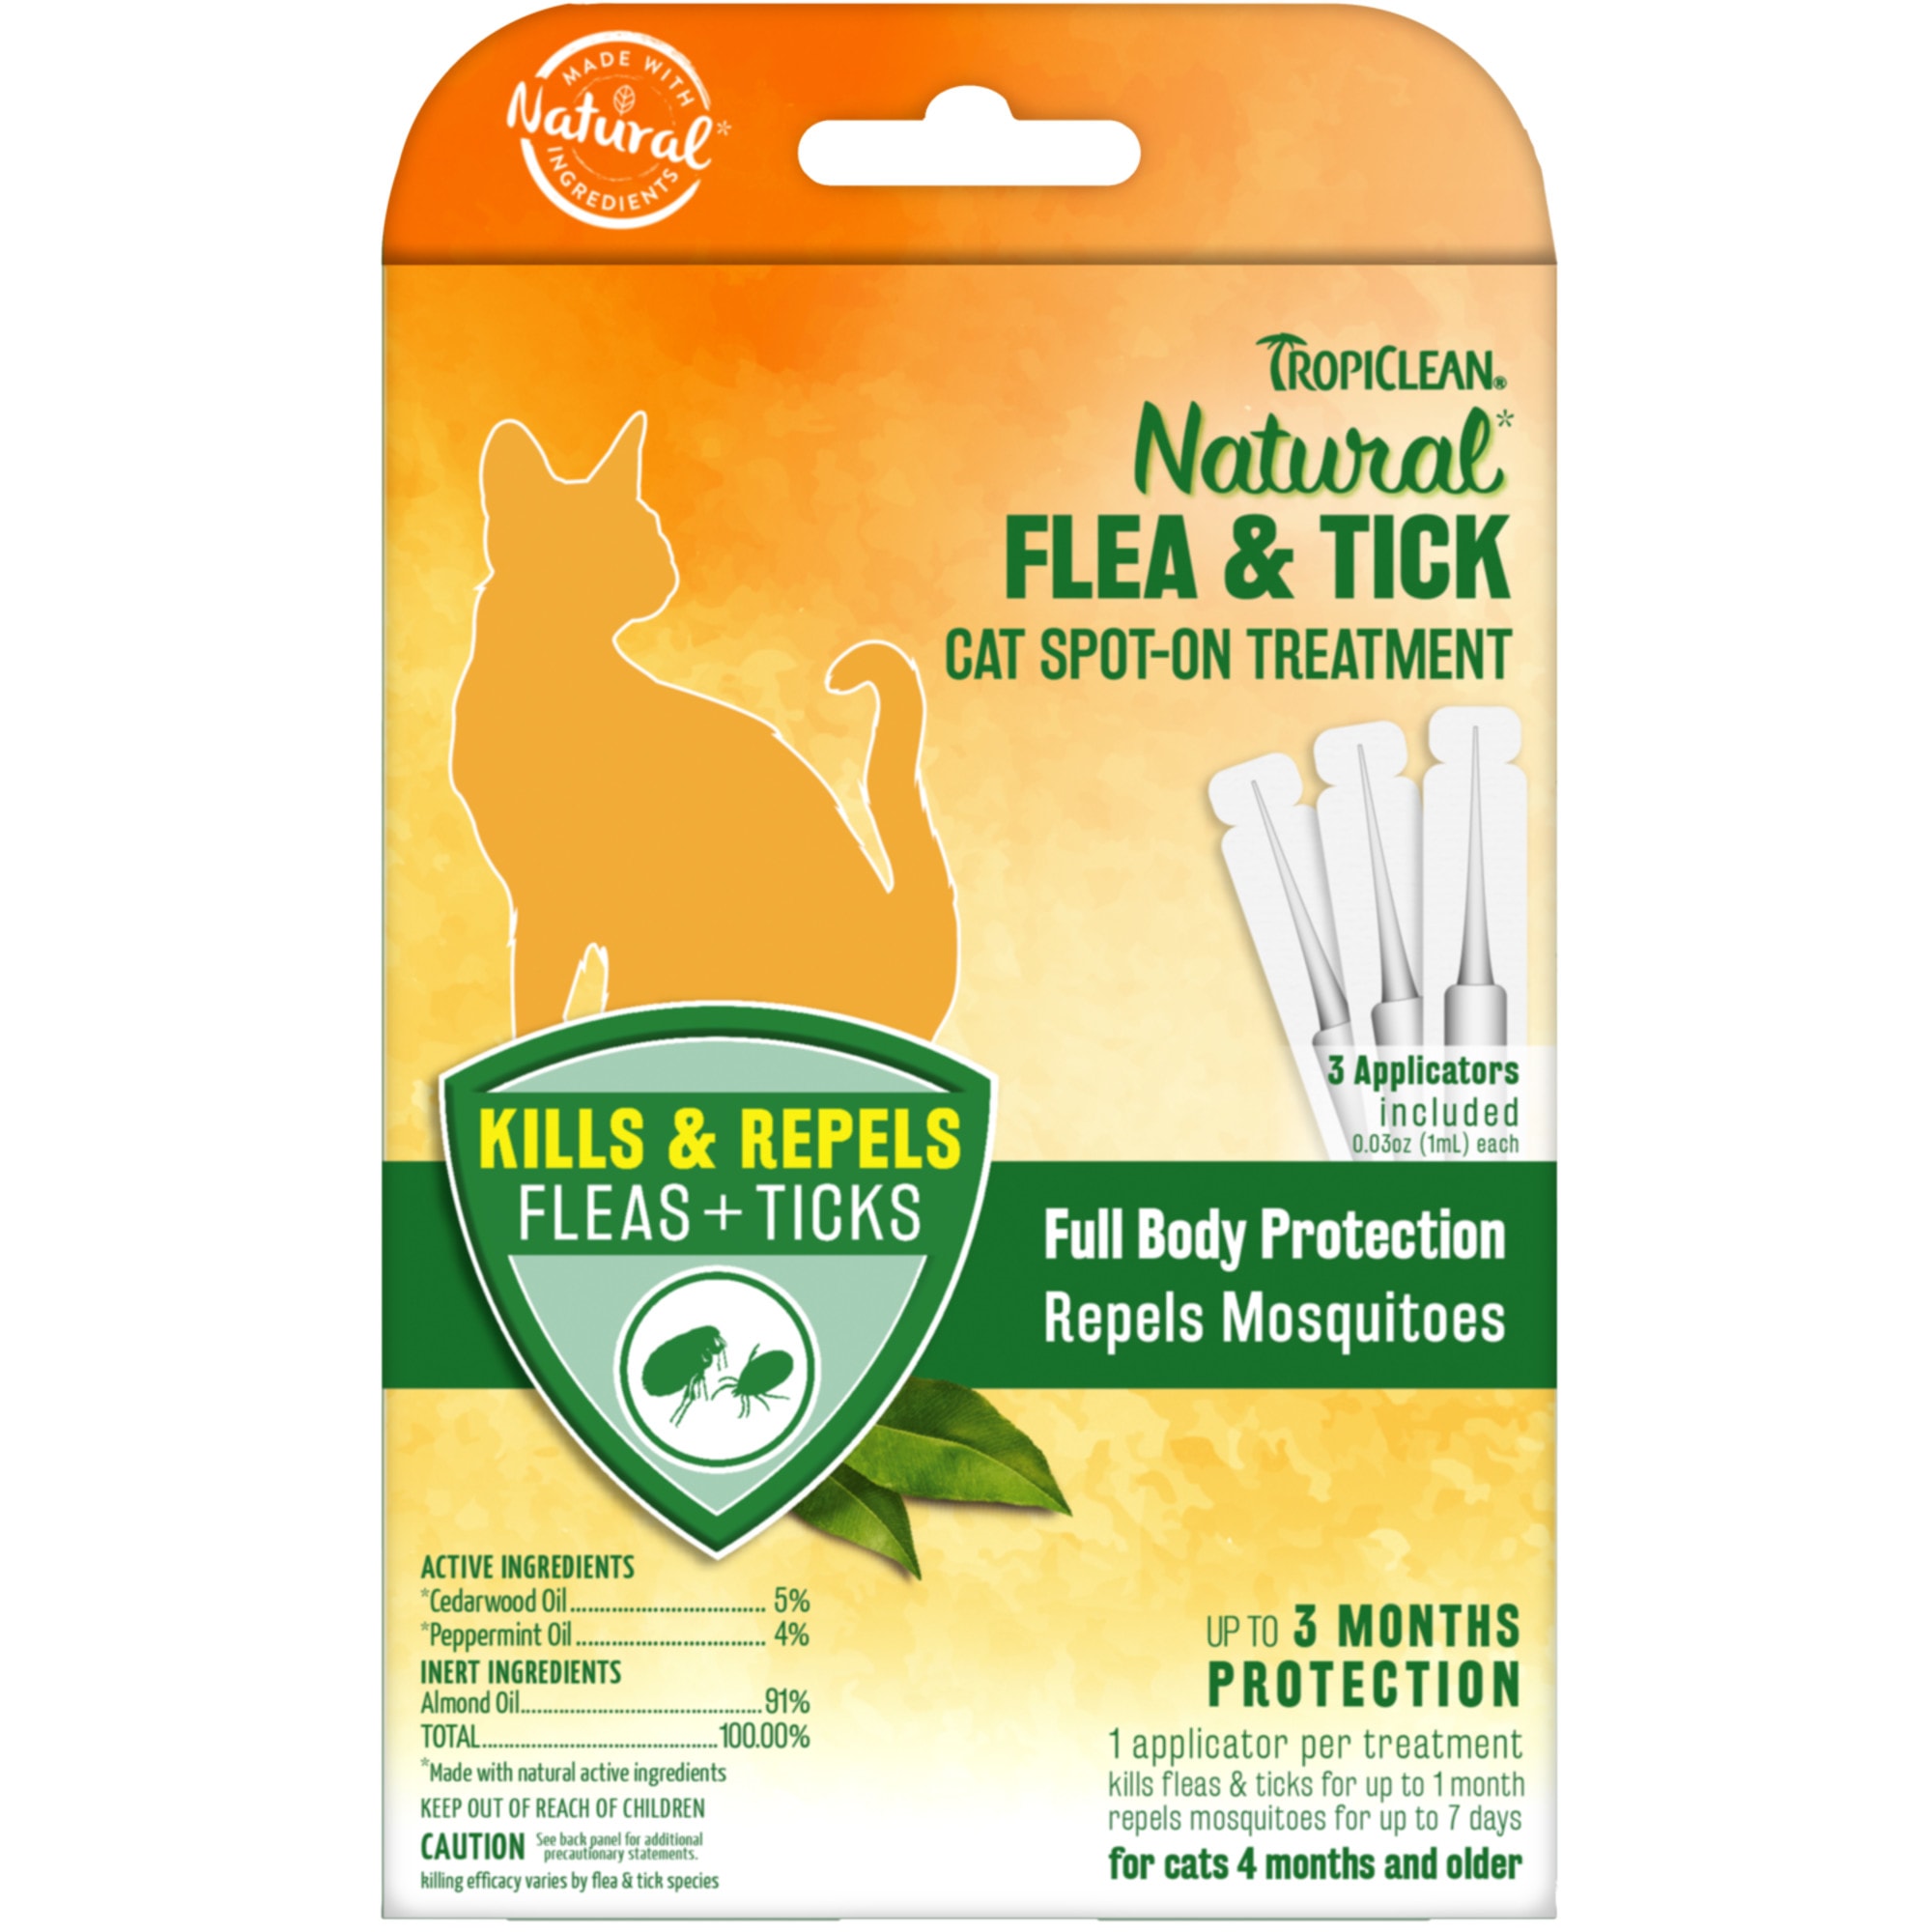 Waterproof Adjustable Flea and Tick Prevention for Cats TUZIK Flea and Tick Treatment for Cats Hypoallergenic with Natural Essential Oils 12 Months Flea Protection for Cats